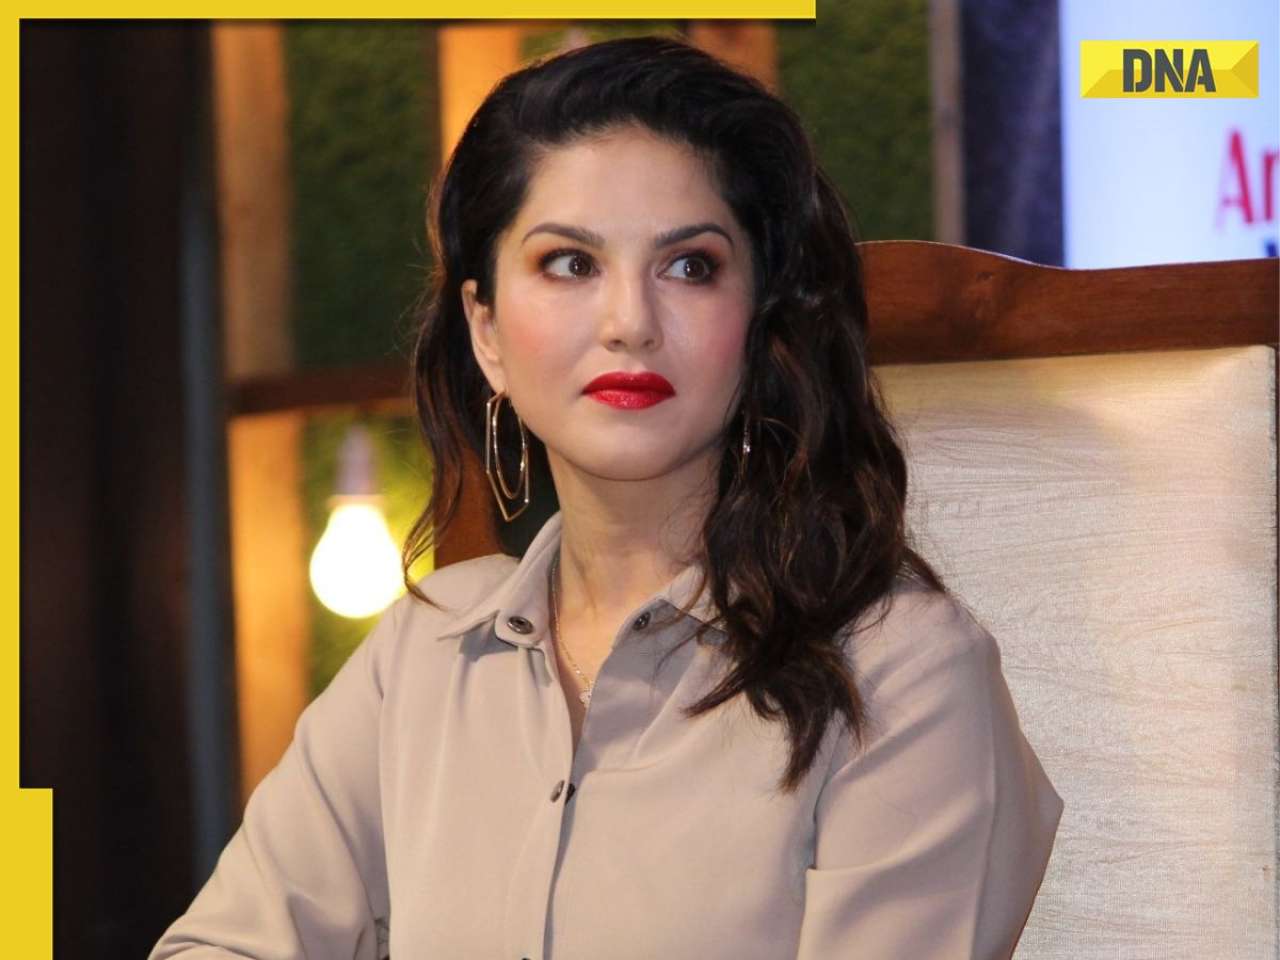 Sunny Leone claims she was engaged before meeting Daniel Weber, called off marriage with ex-partner: 'I asked him..'